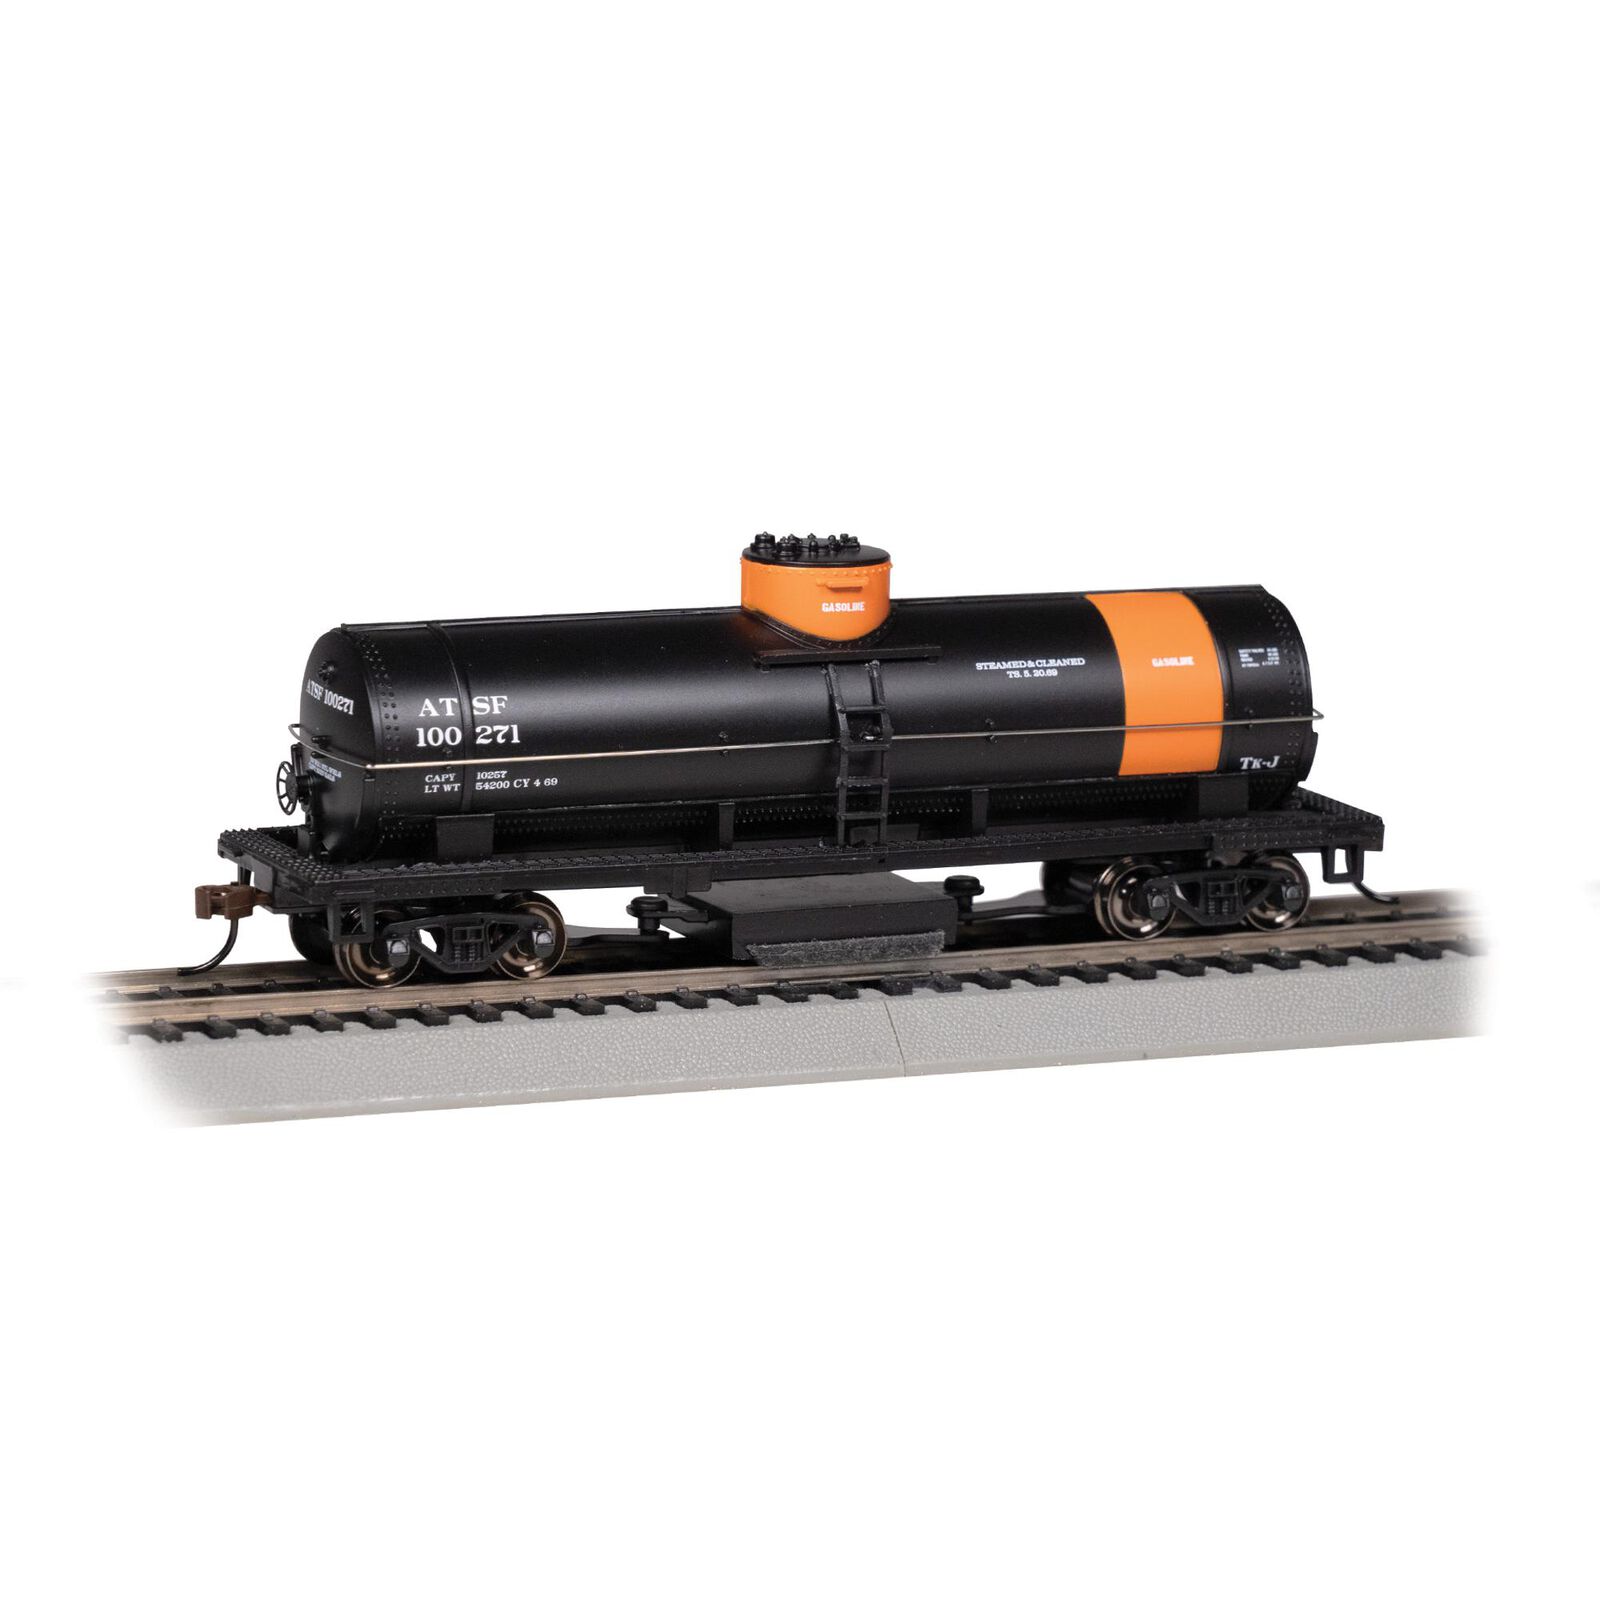 HO Track Cleaning Tank Car, SF #100271 Gasoline